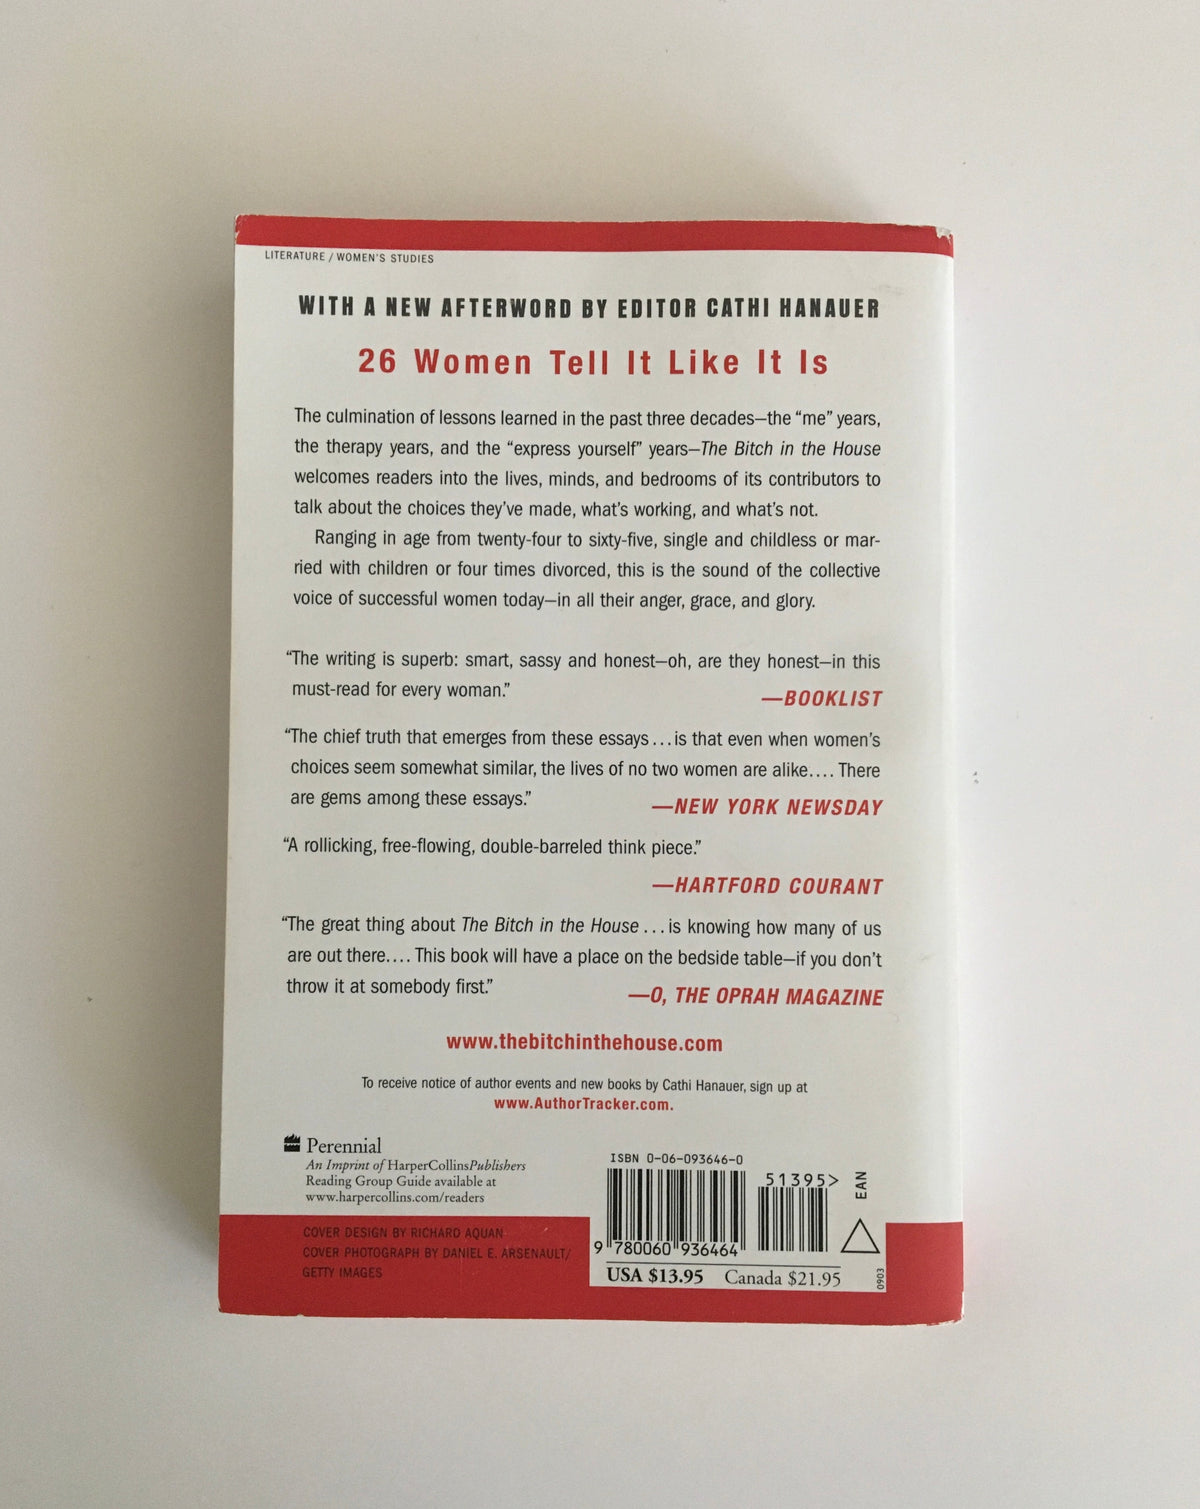 The Bitch in the House: 26 Women Tell the Truth about Sex, Solitude, Work, Motherhood, and Marriage edited by Cathi Hanauer